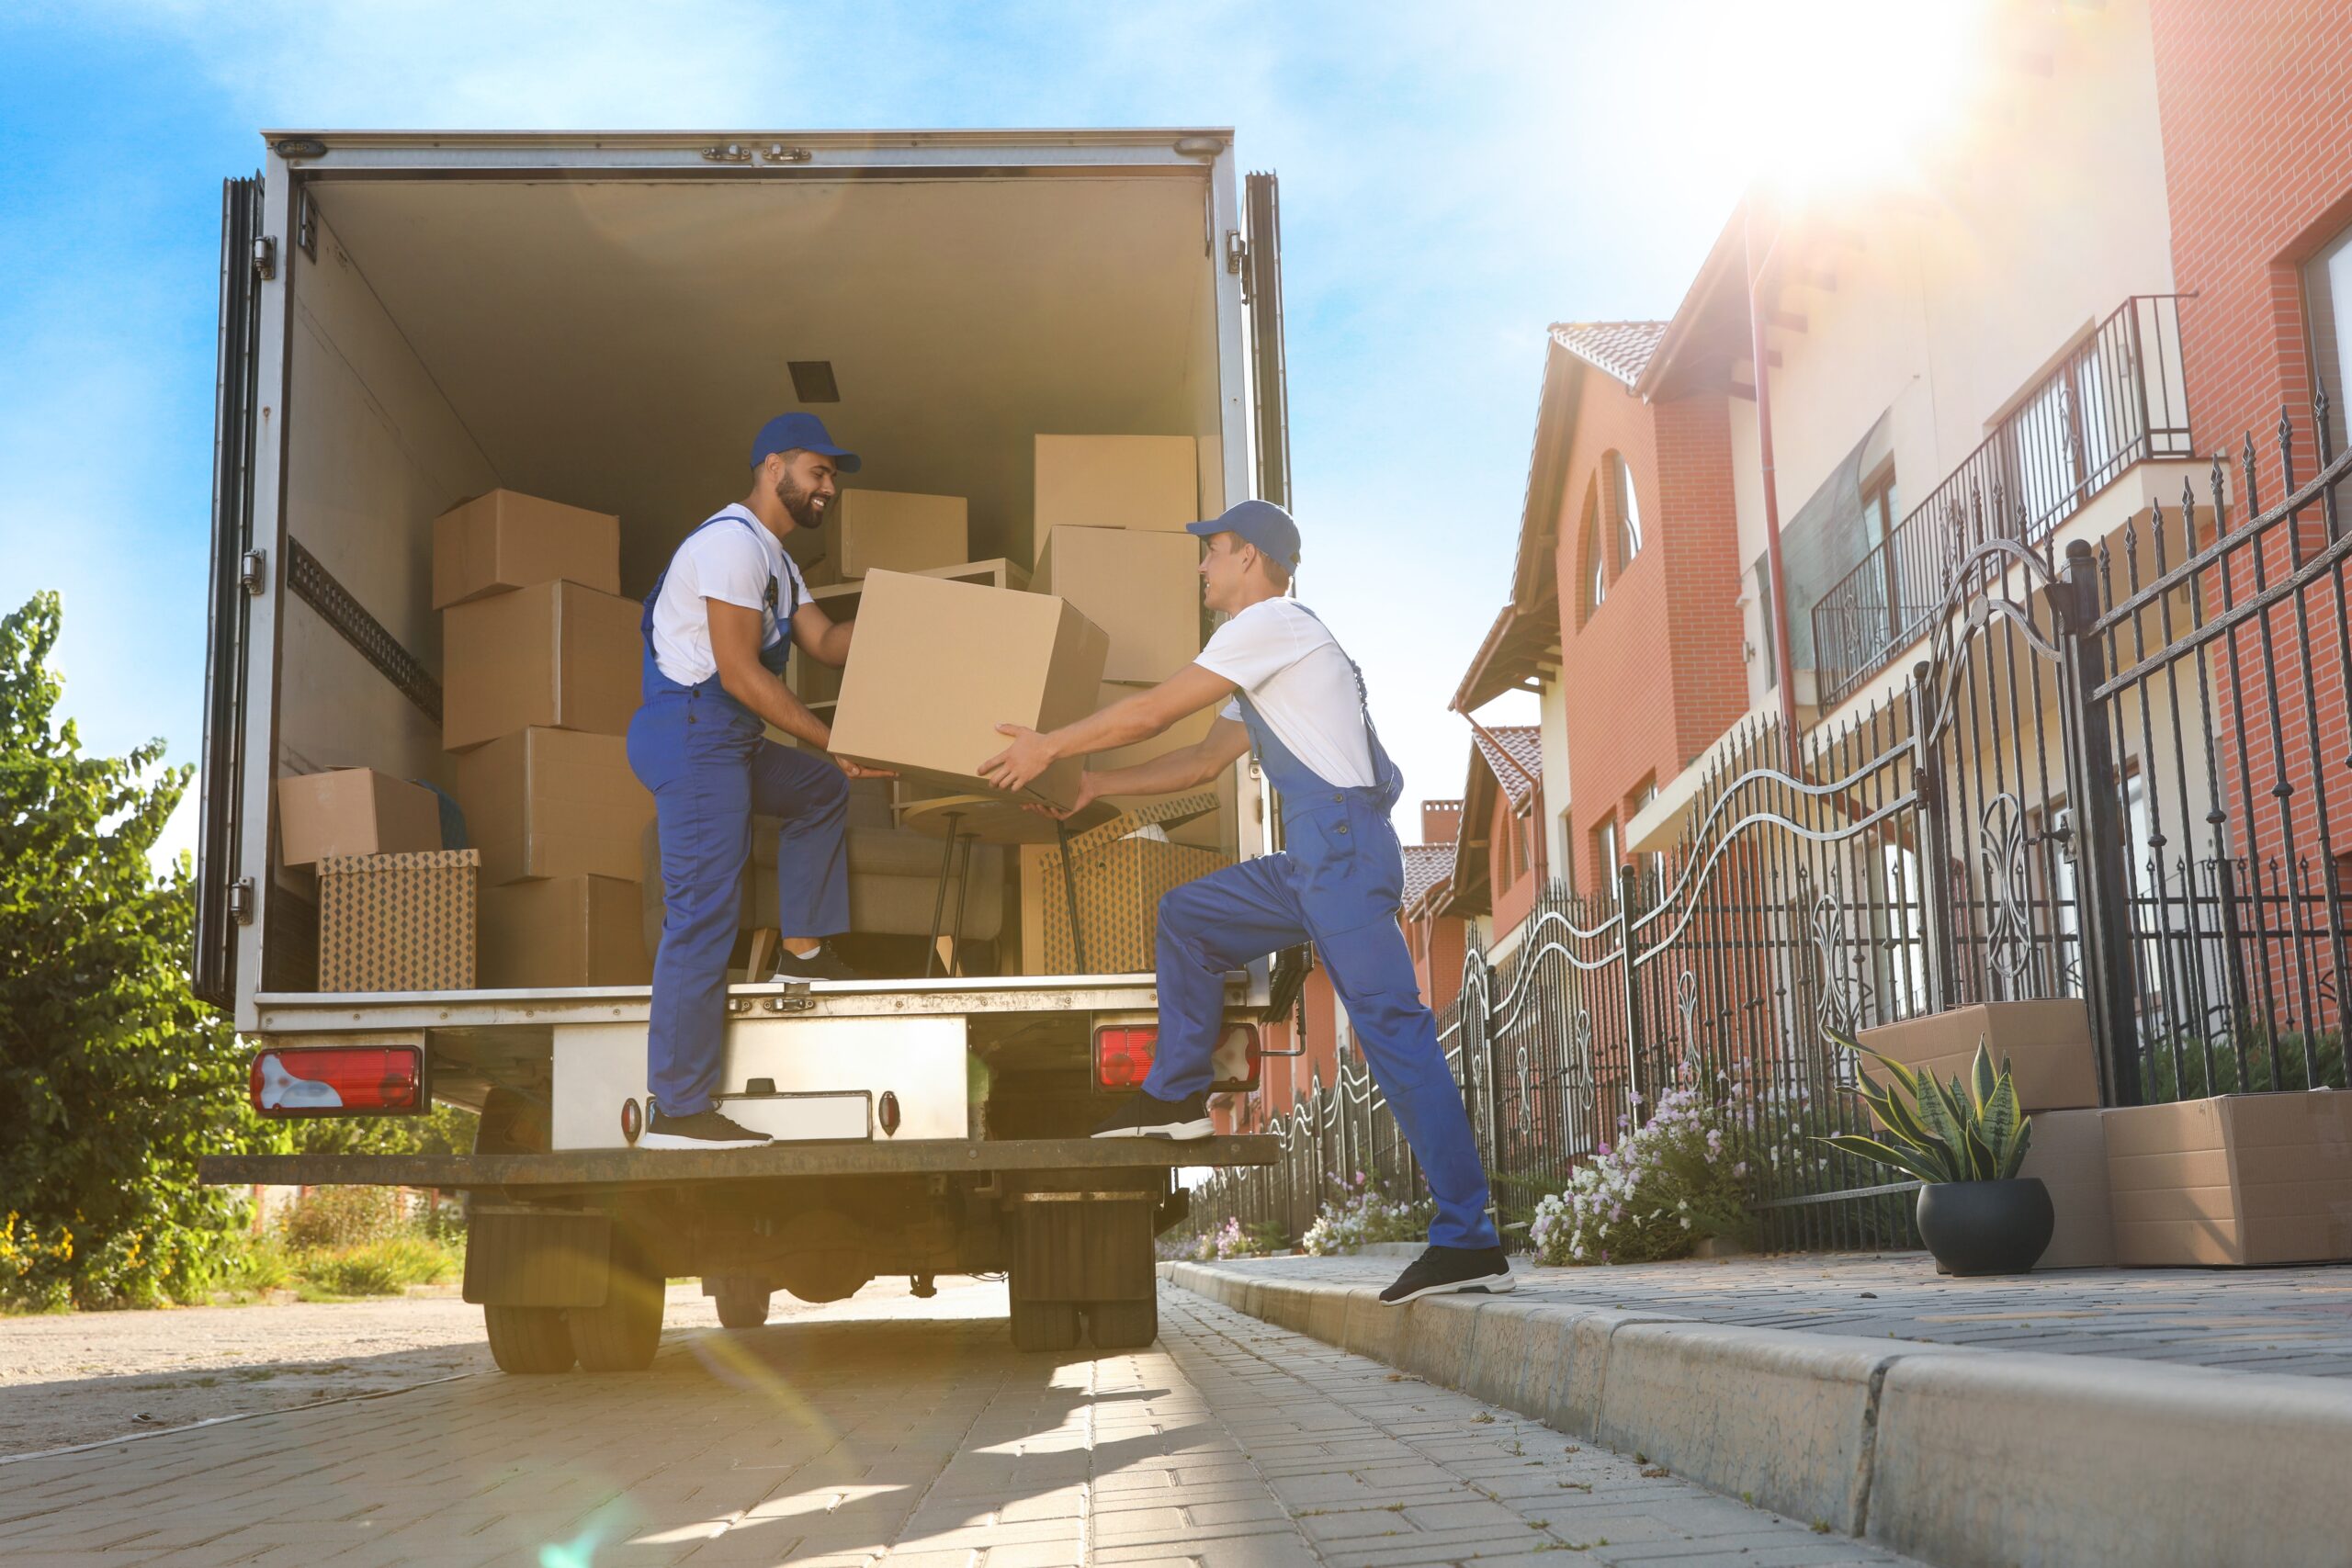 NRI coordinates quality corporate movers for household goods relocation